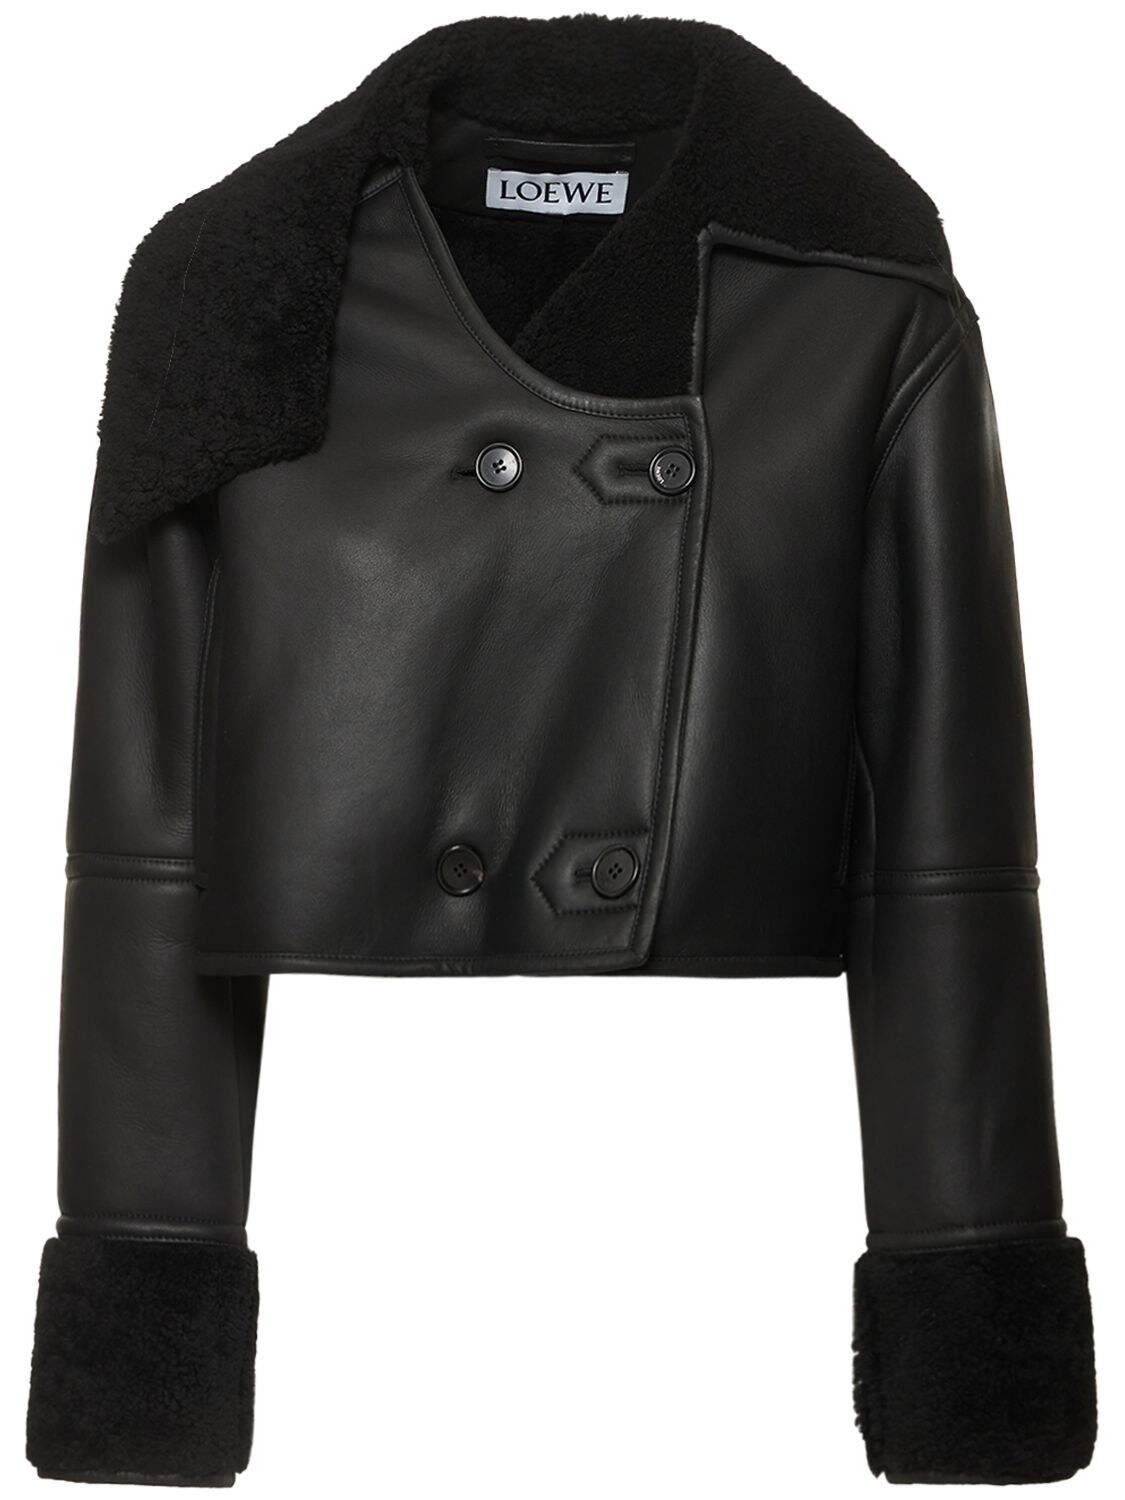 LOEWE SHEARLING DECONSTRUCTED CROPPED JACKET